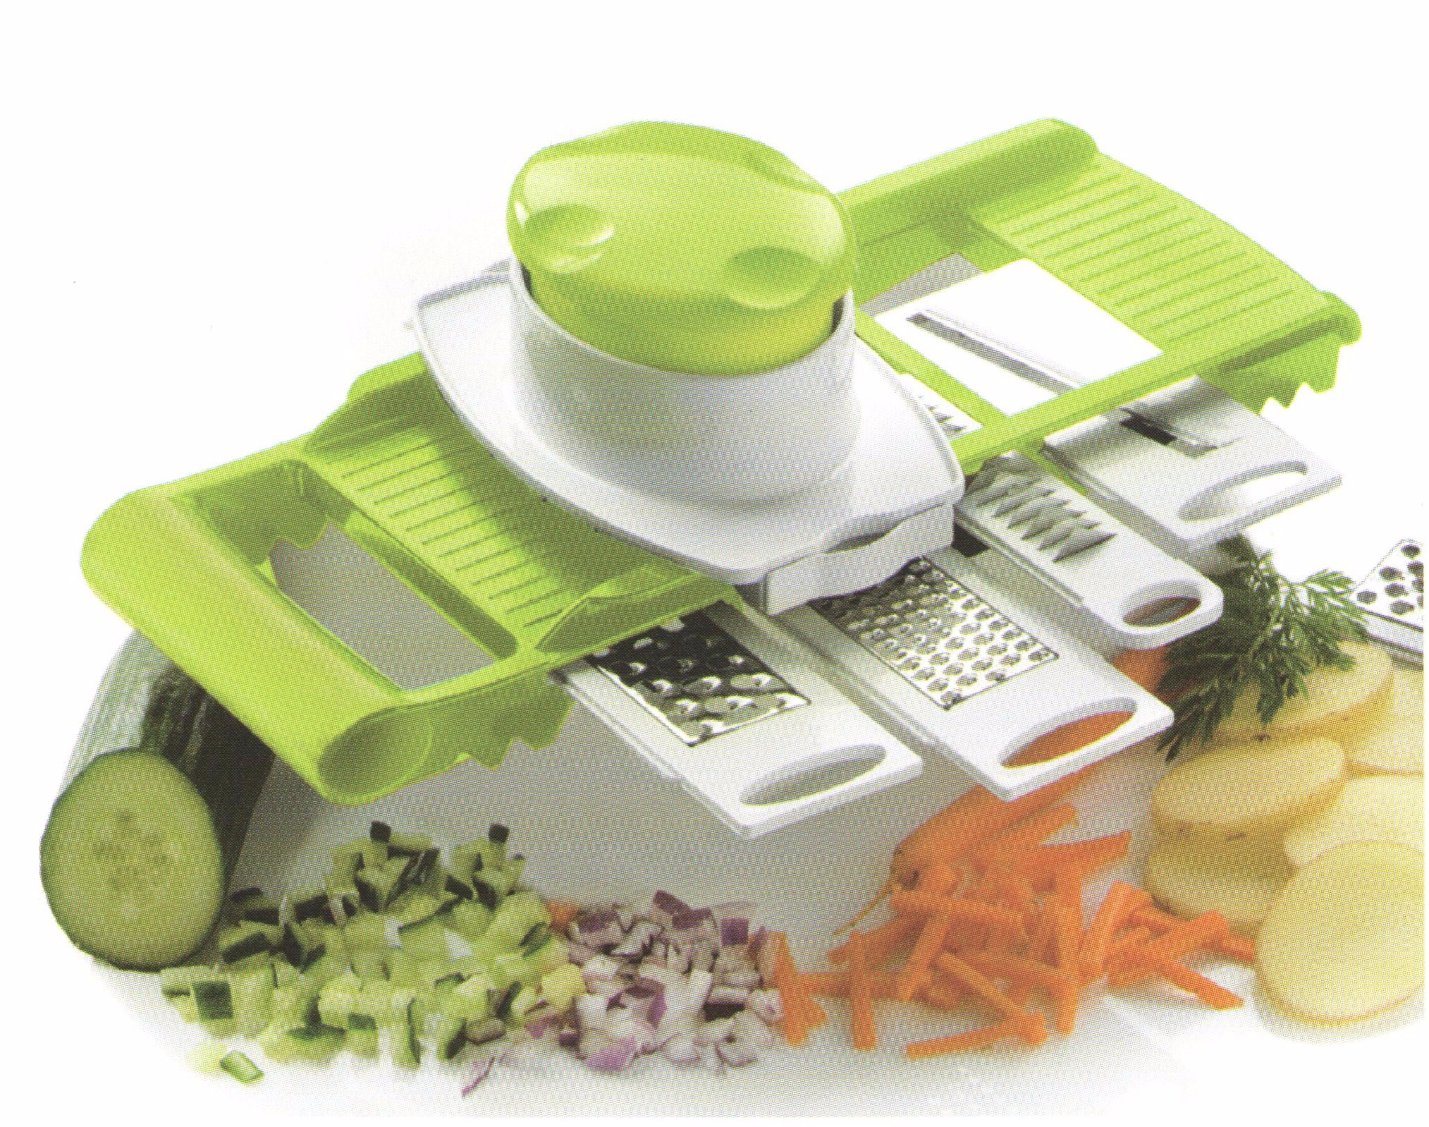 5 in 1 Plastic Food Processor Vegetable Chopper Cutting Machine with Steel Parts No. Cg022